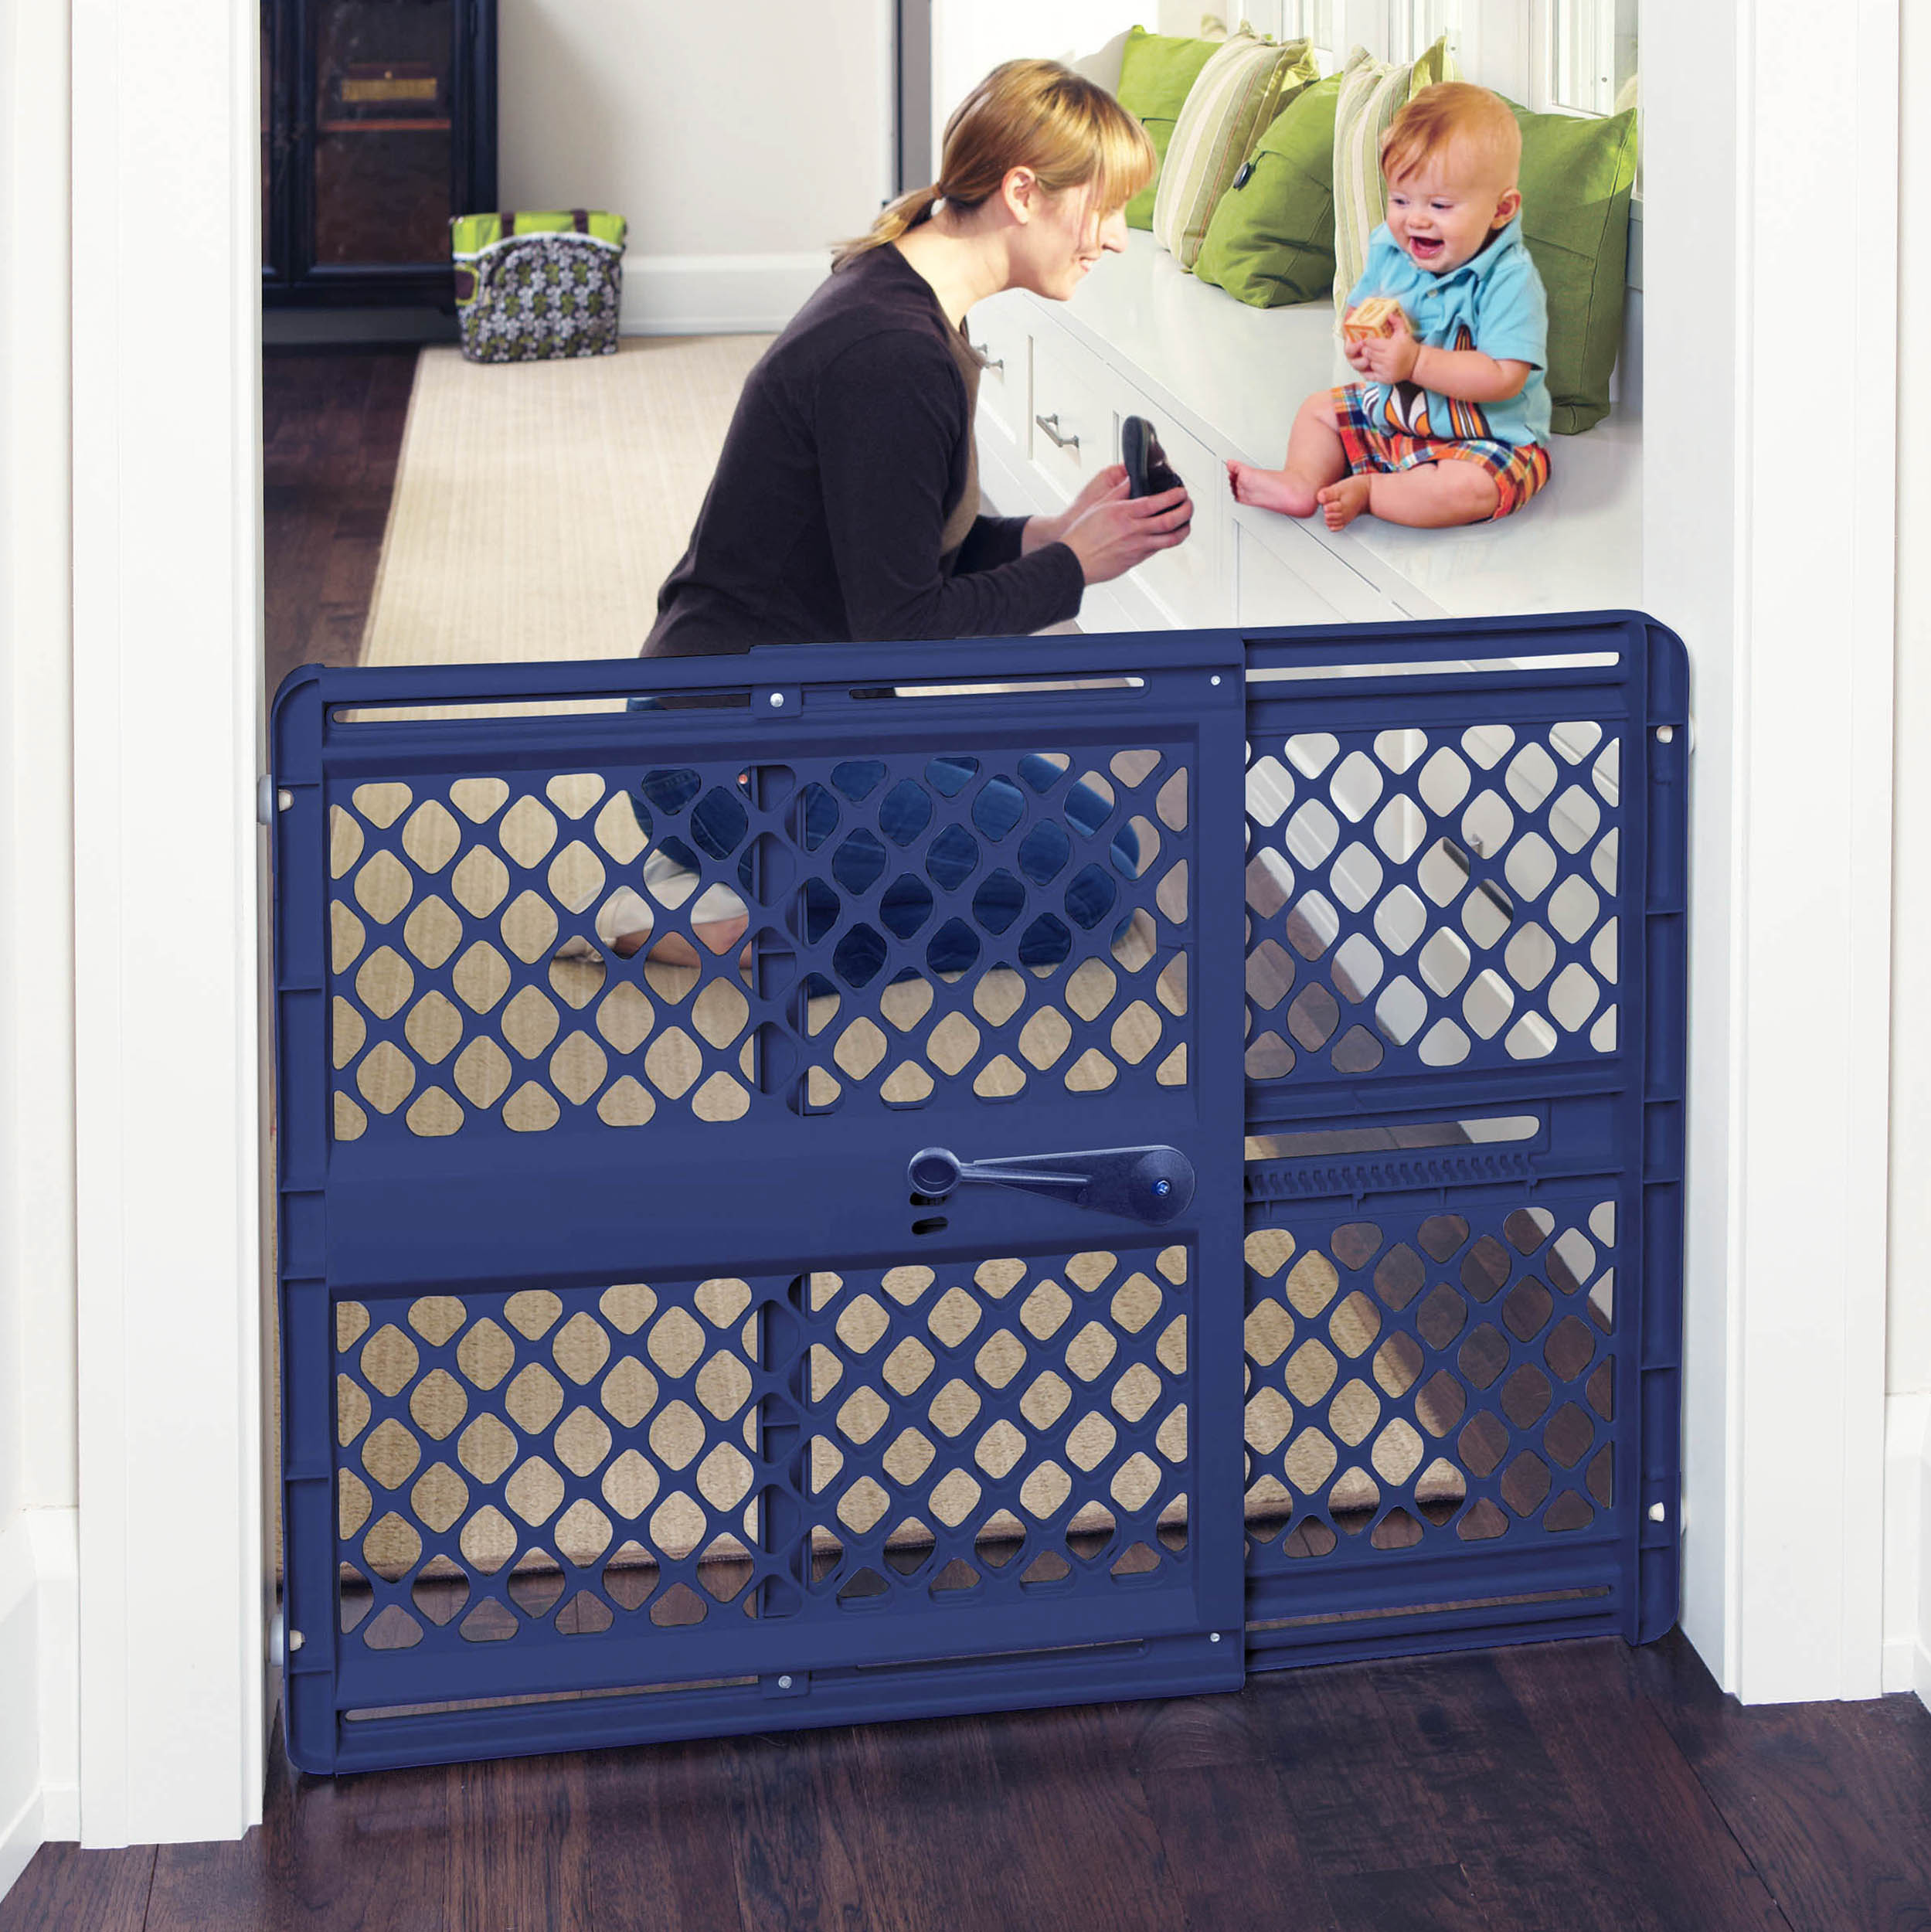 Toddleroo by North States 26"-42" Supergate Classic Baby Safety Gate, Color Navy, Plastic Material, Ages 0+ - image 1 of 6